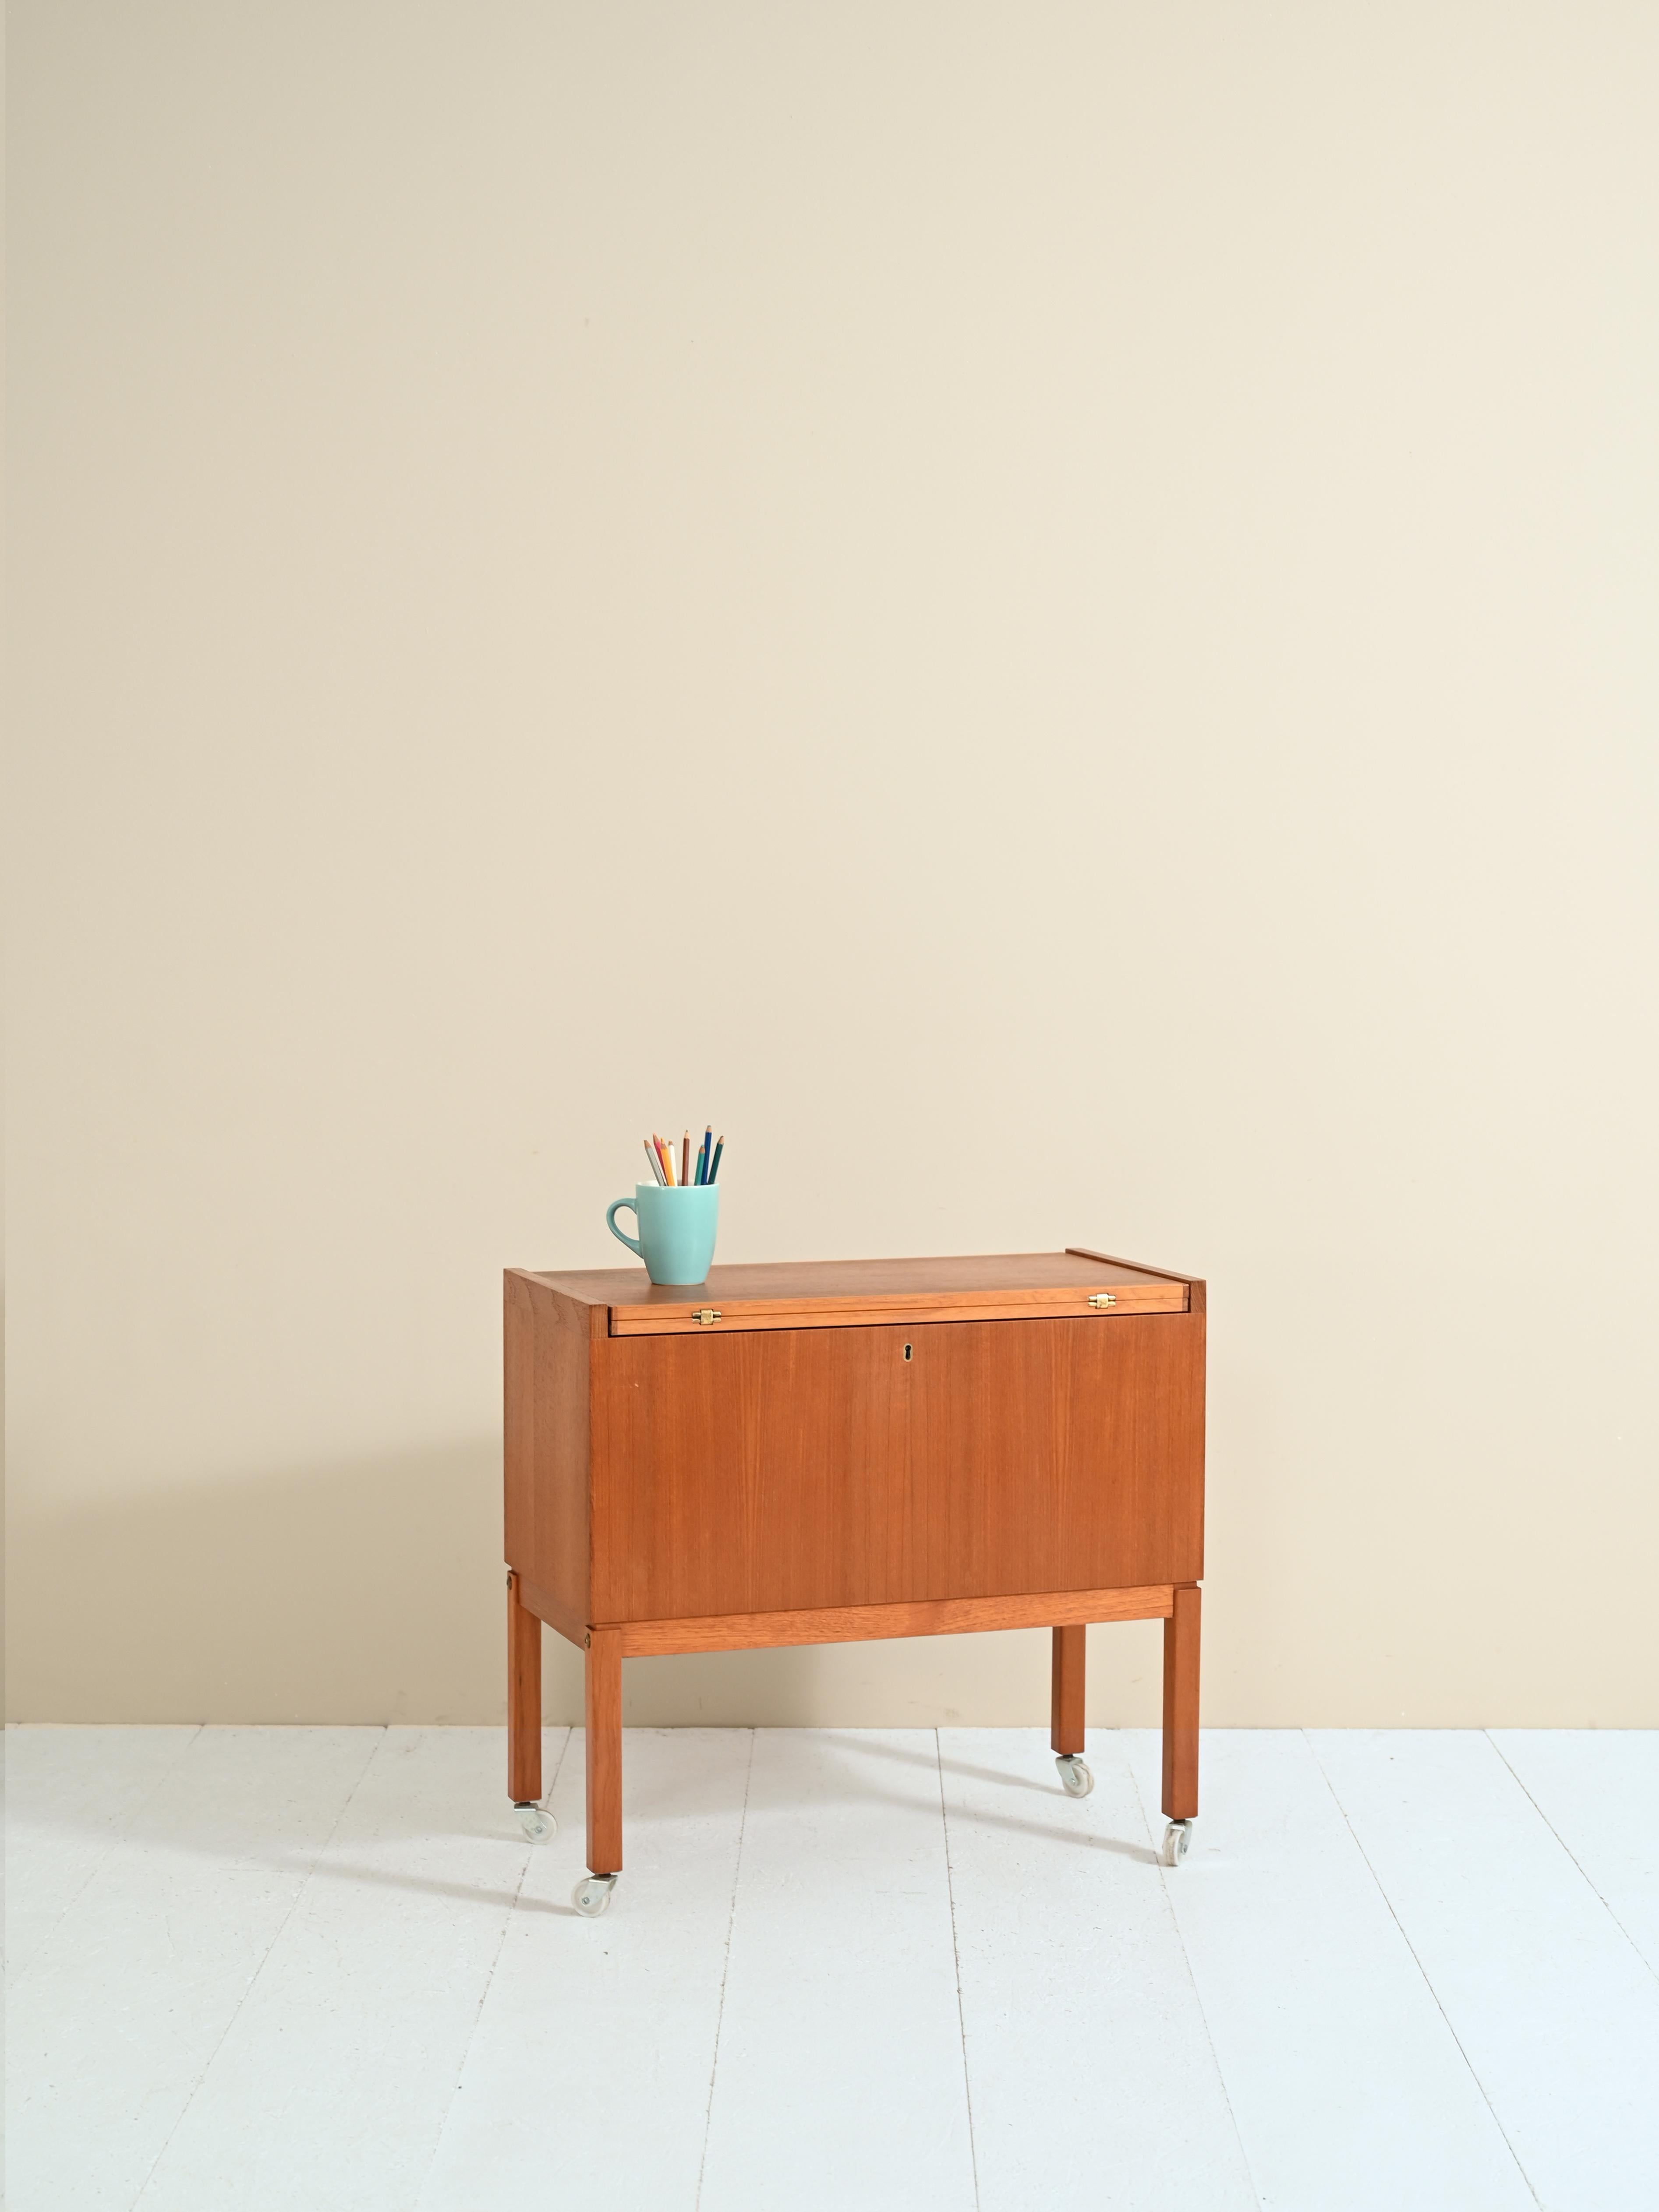 Teak wood sewing table, the production is Scandinavian vintage from the 1950s.

The table has a flip top that turns the cart into a convenient 70 x 70cm square table top.
Hidden under the top is the capacious compartment originally used to hold